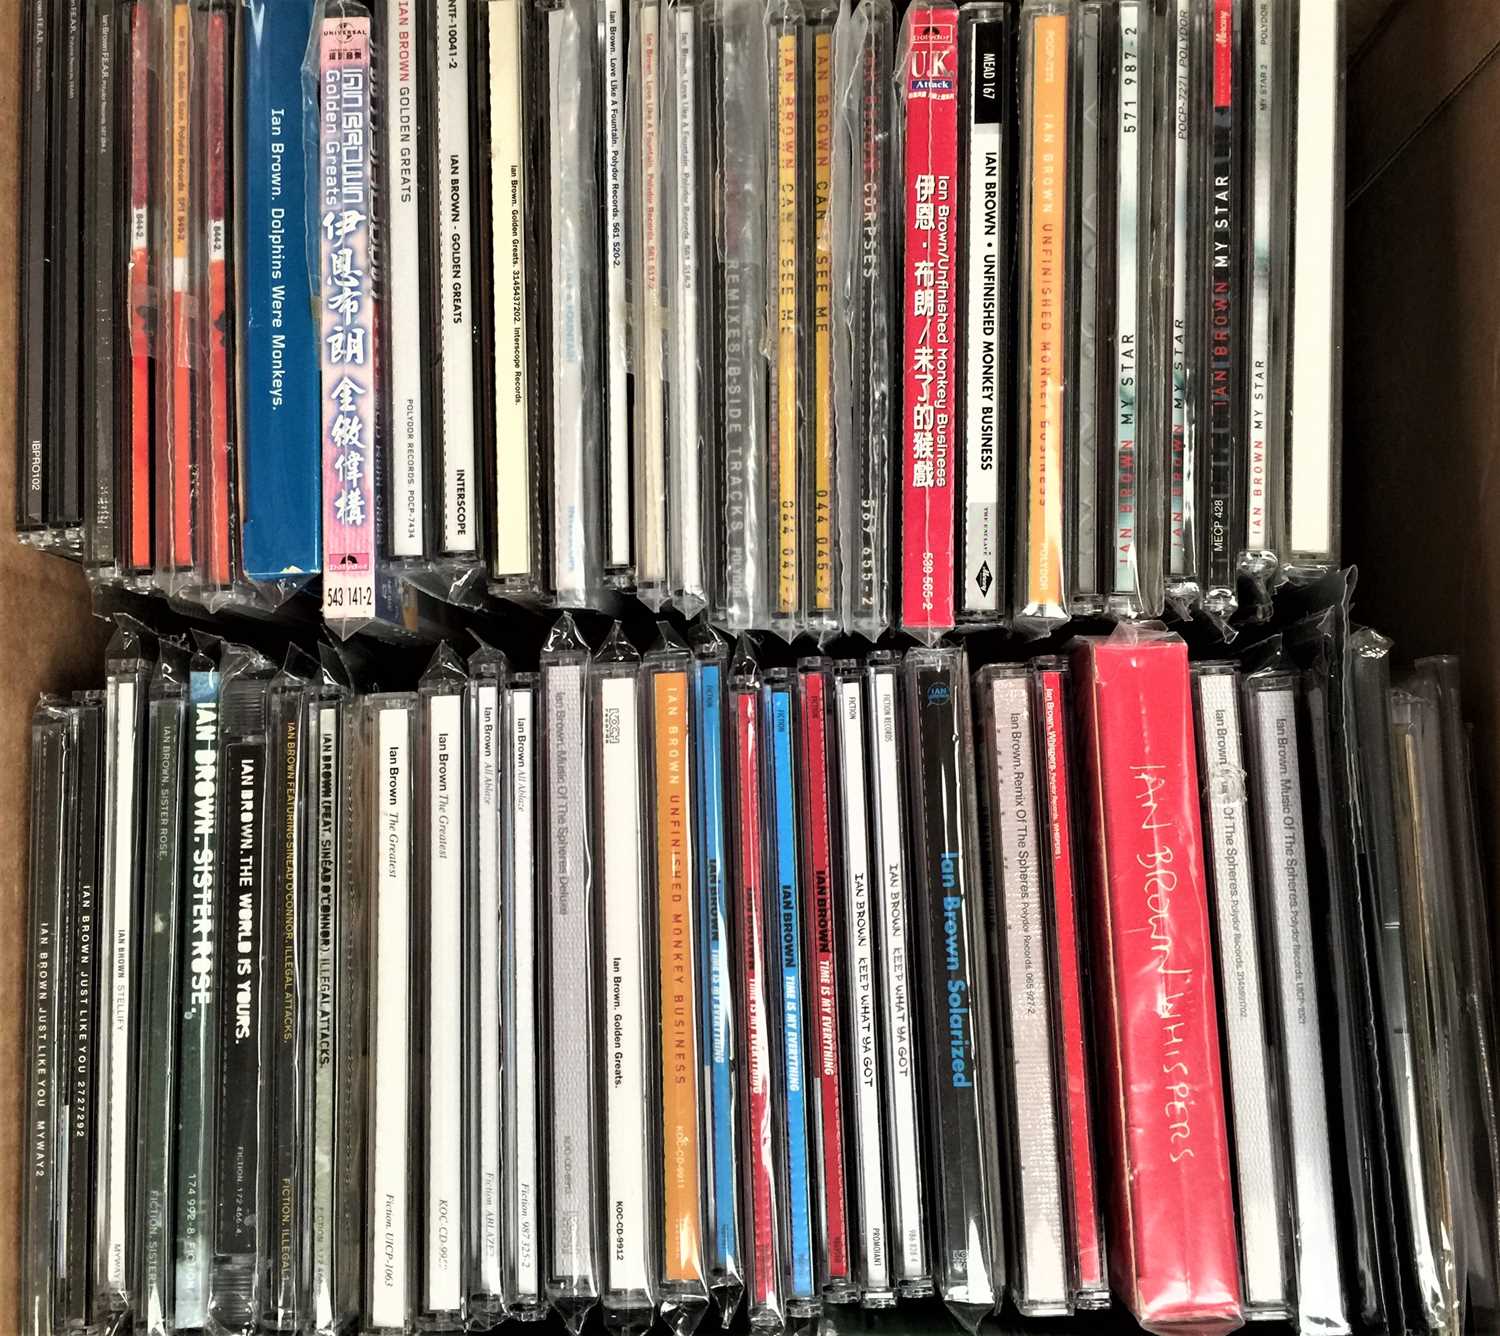 Lot 325 - IAN BROWN & RELATED - CD COLLECTION